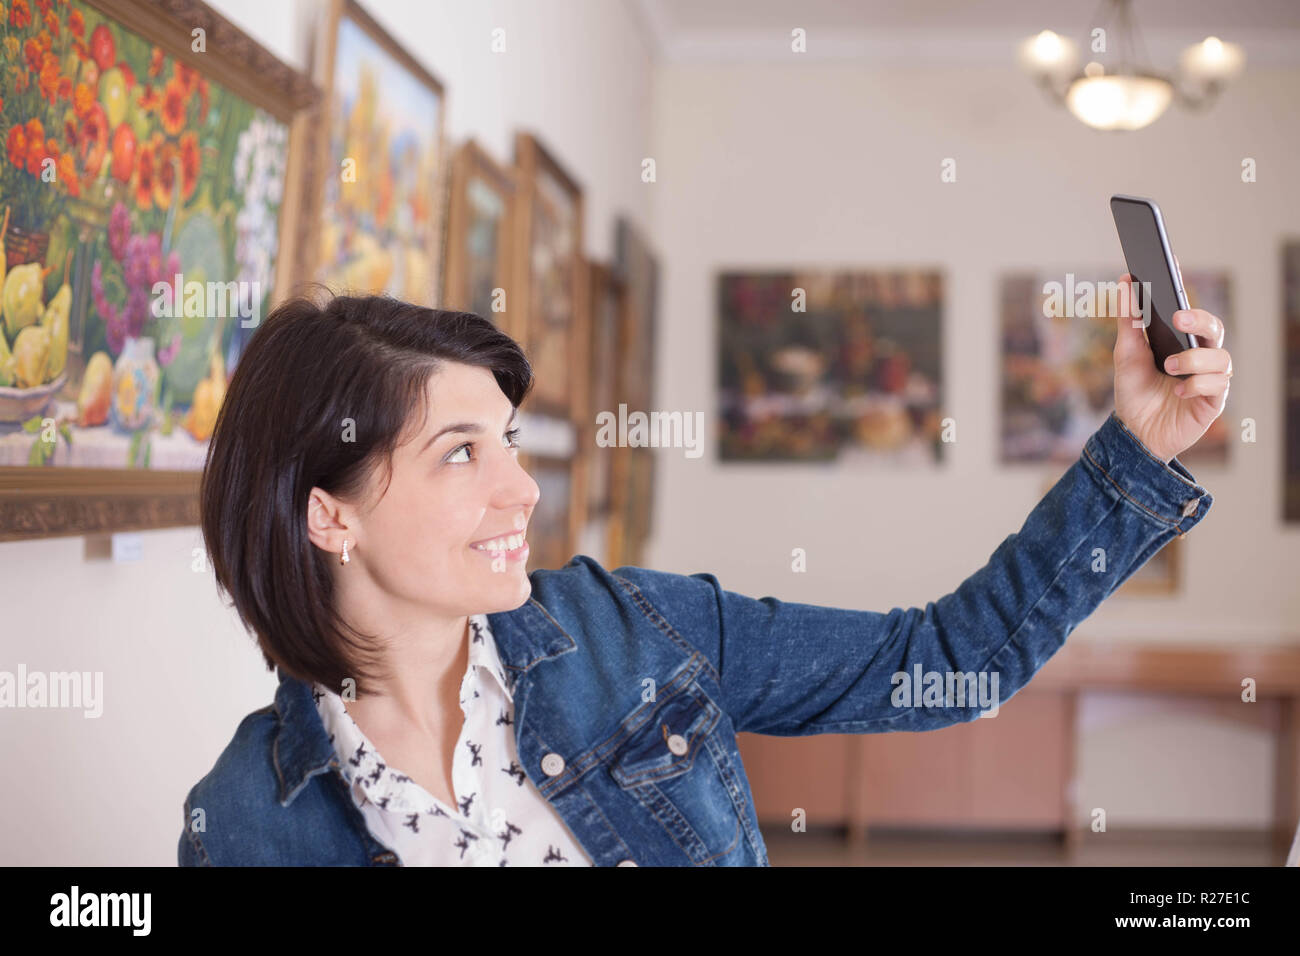 Portrait of a young woman taking a selfie in an art gallery or museum. Stock Photo